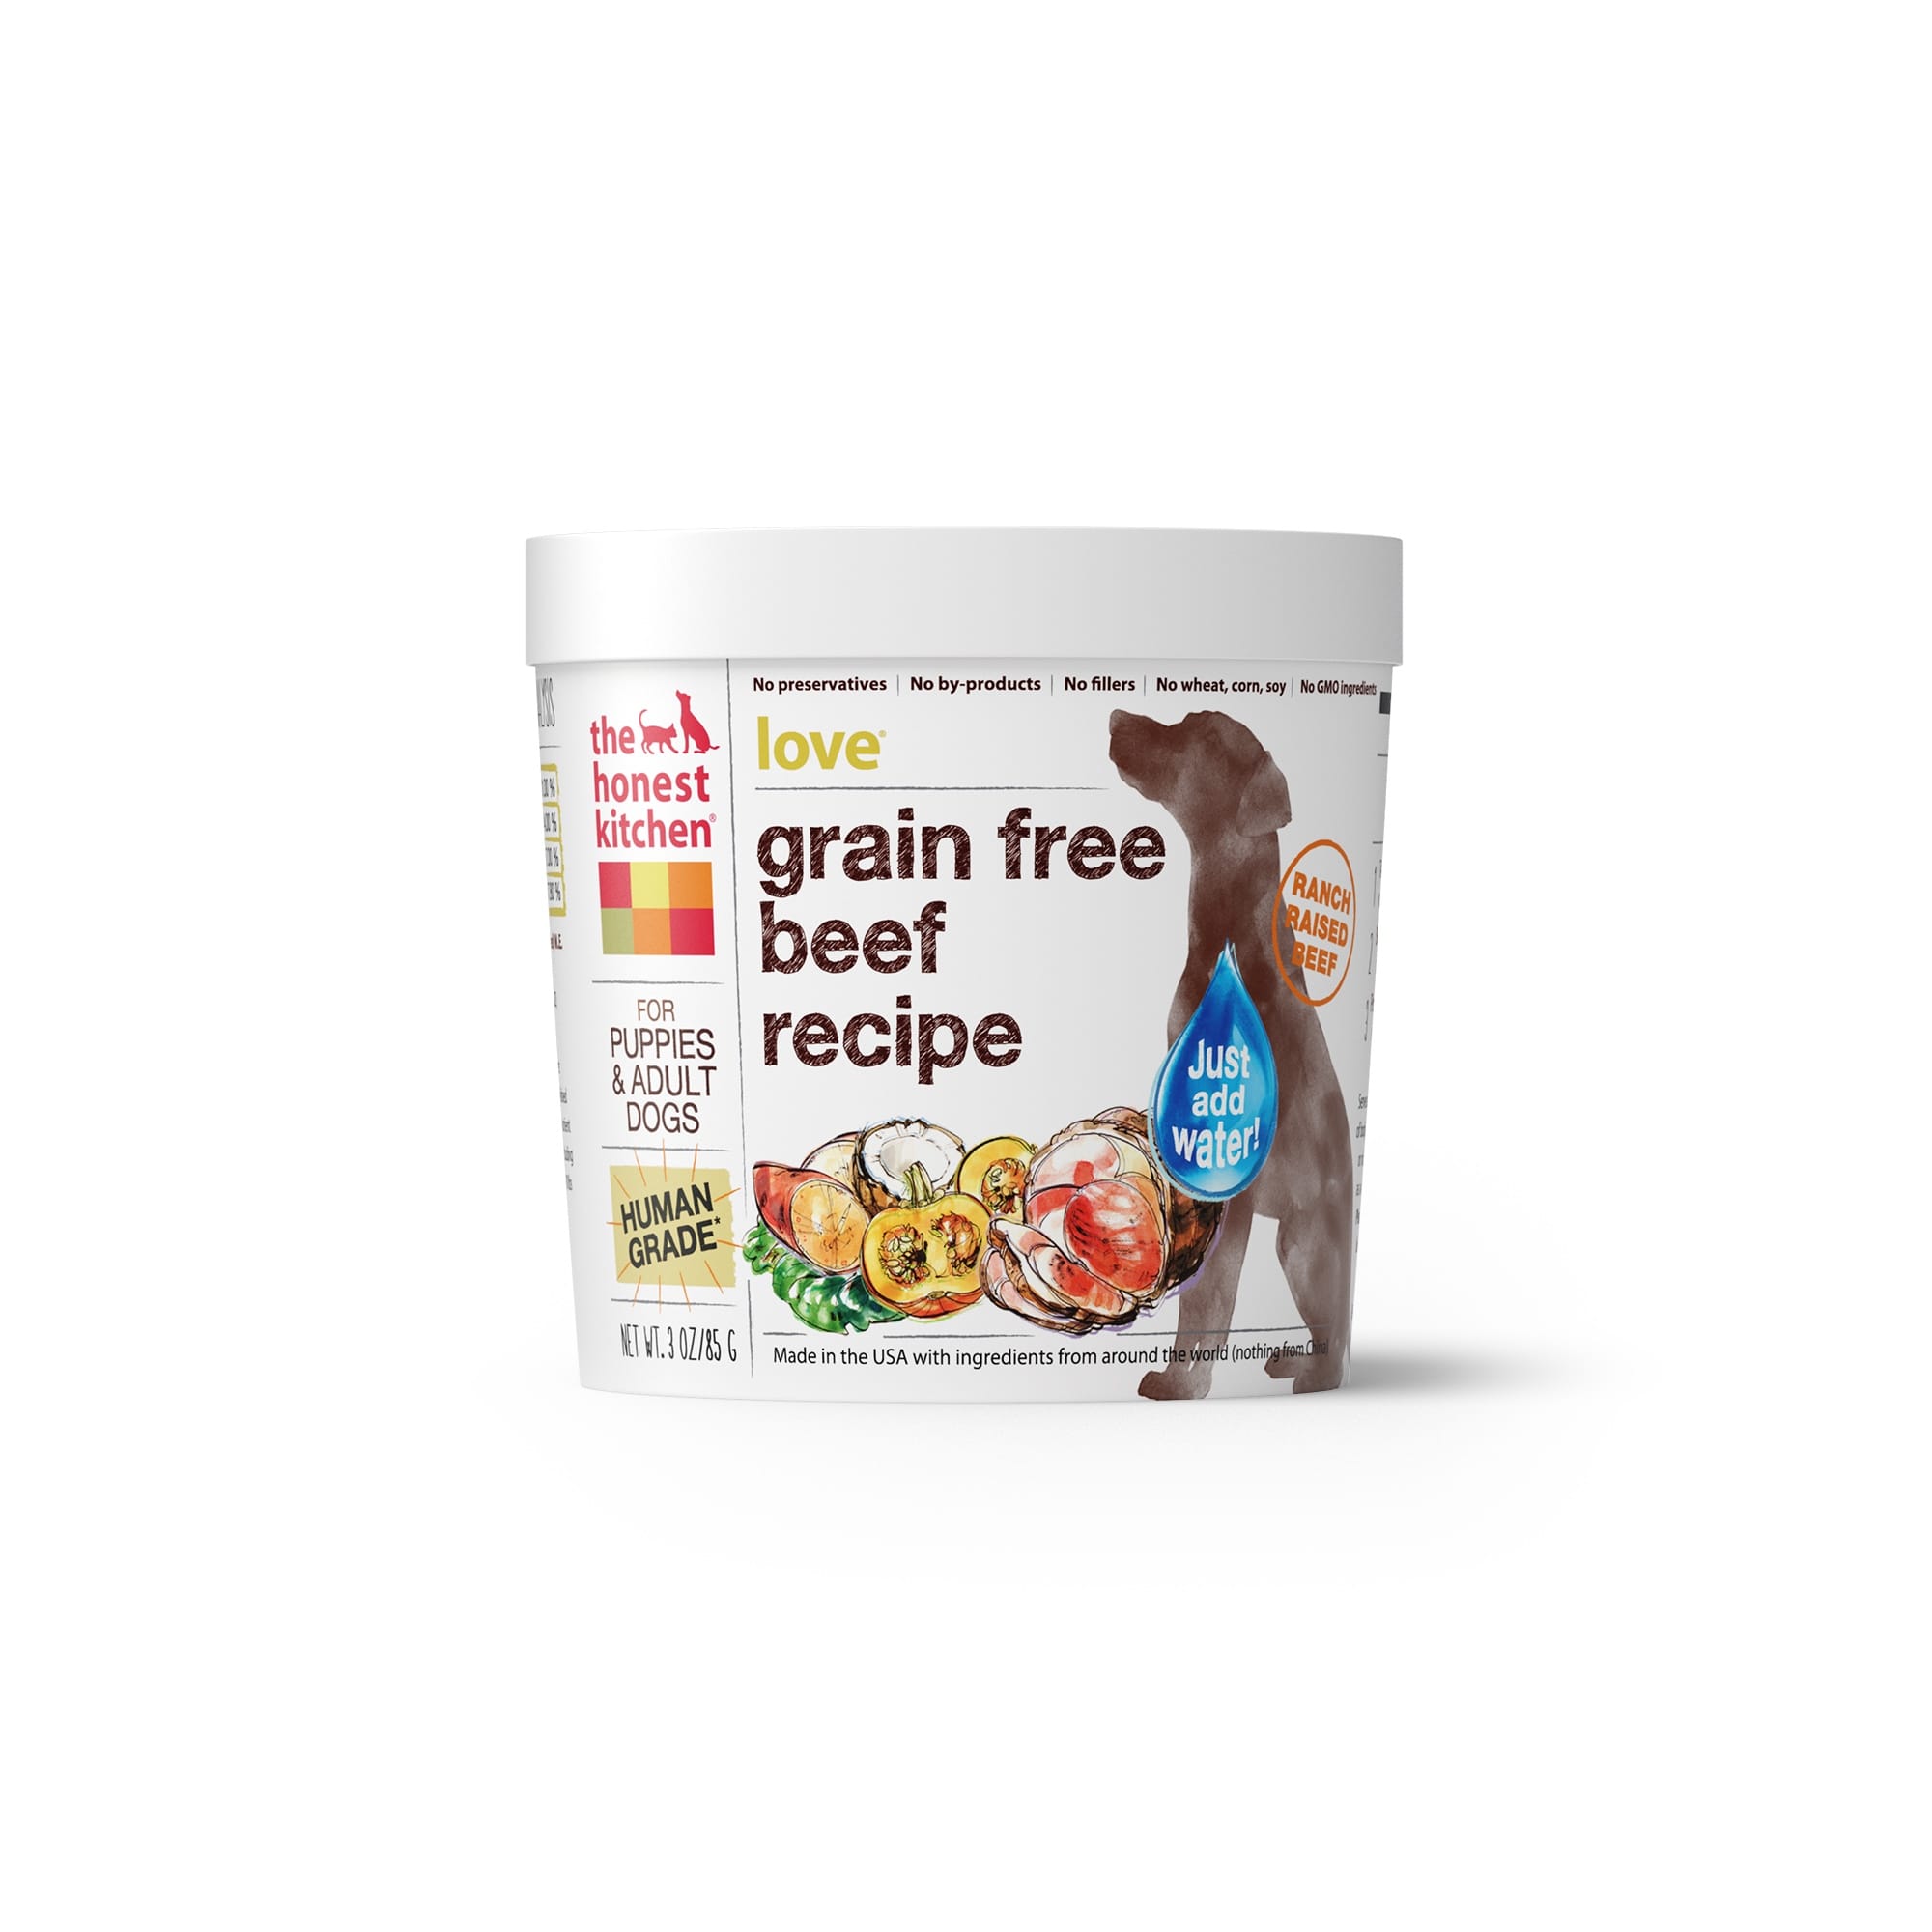 DEHYDRATED-GRAIN-FREE-BEEF-SINGLE-SERVE-CUP